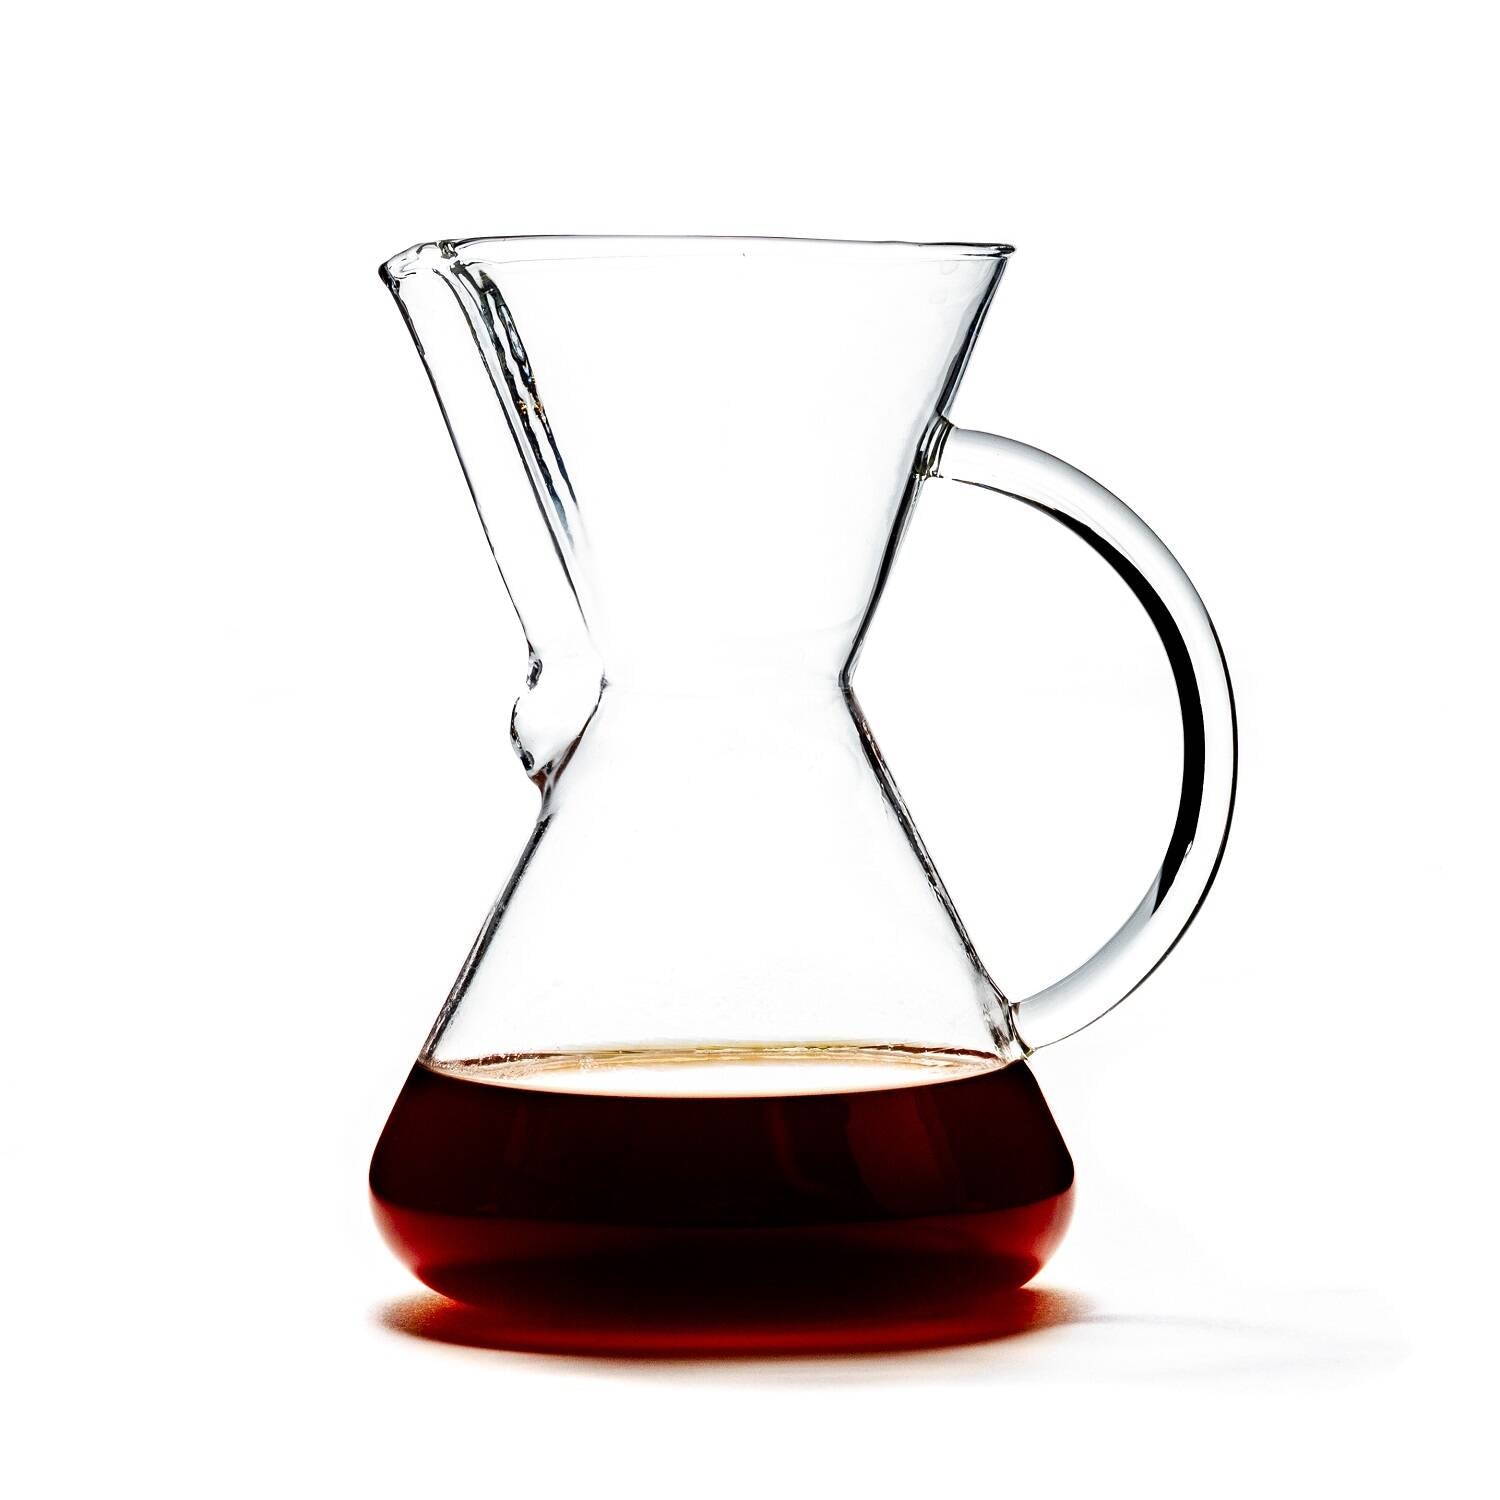 G70 Pourover Coffee Vessel - Saint Anthony Industries